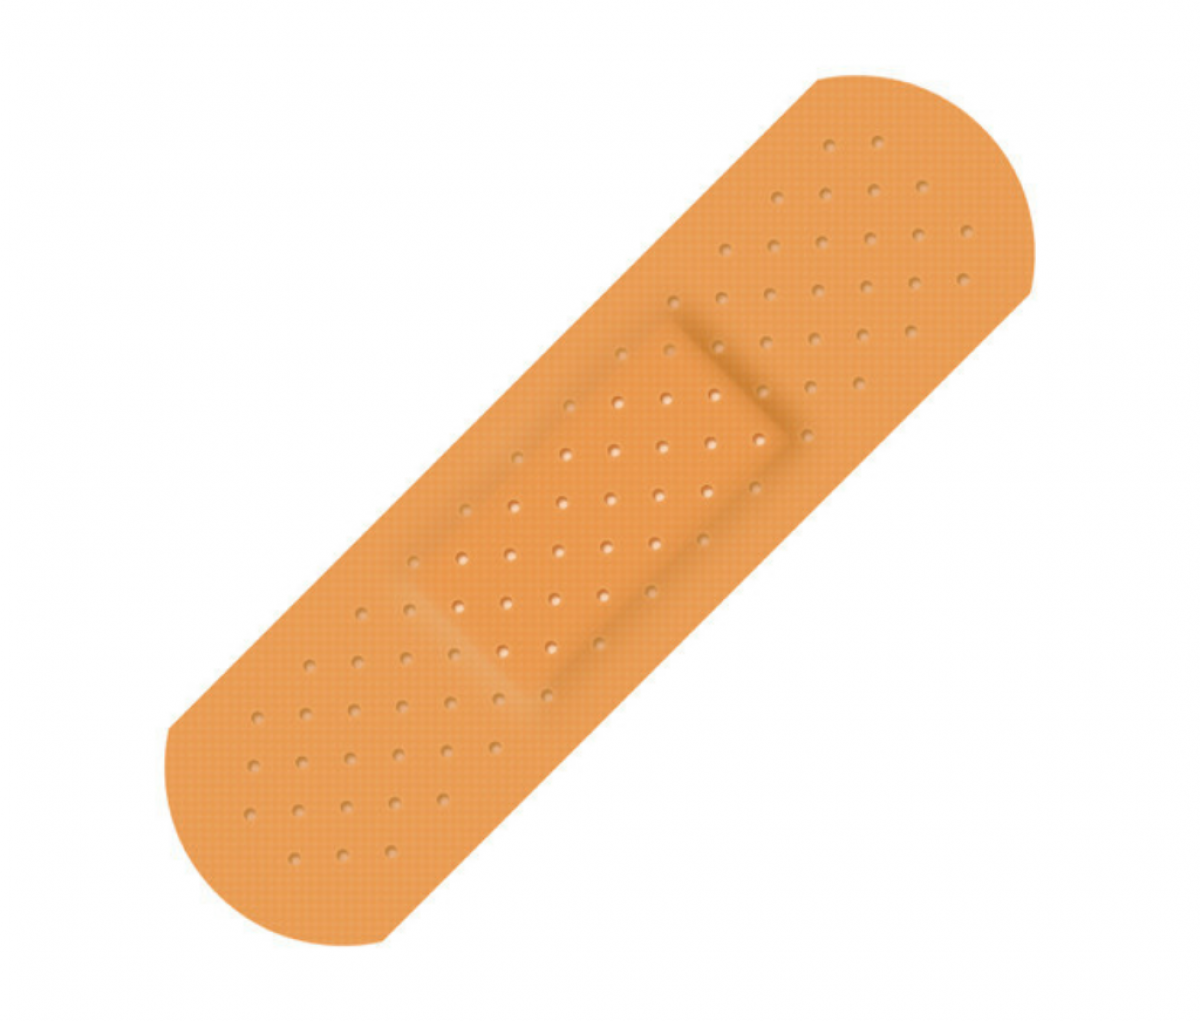 Band Aid Plaster